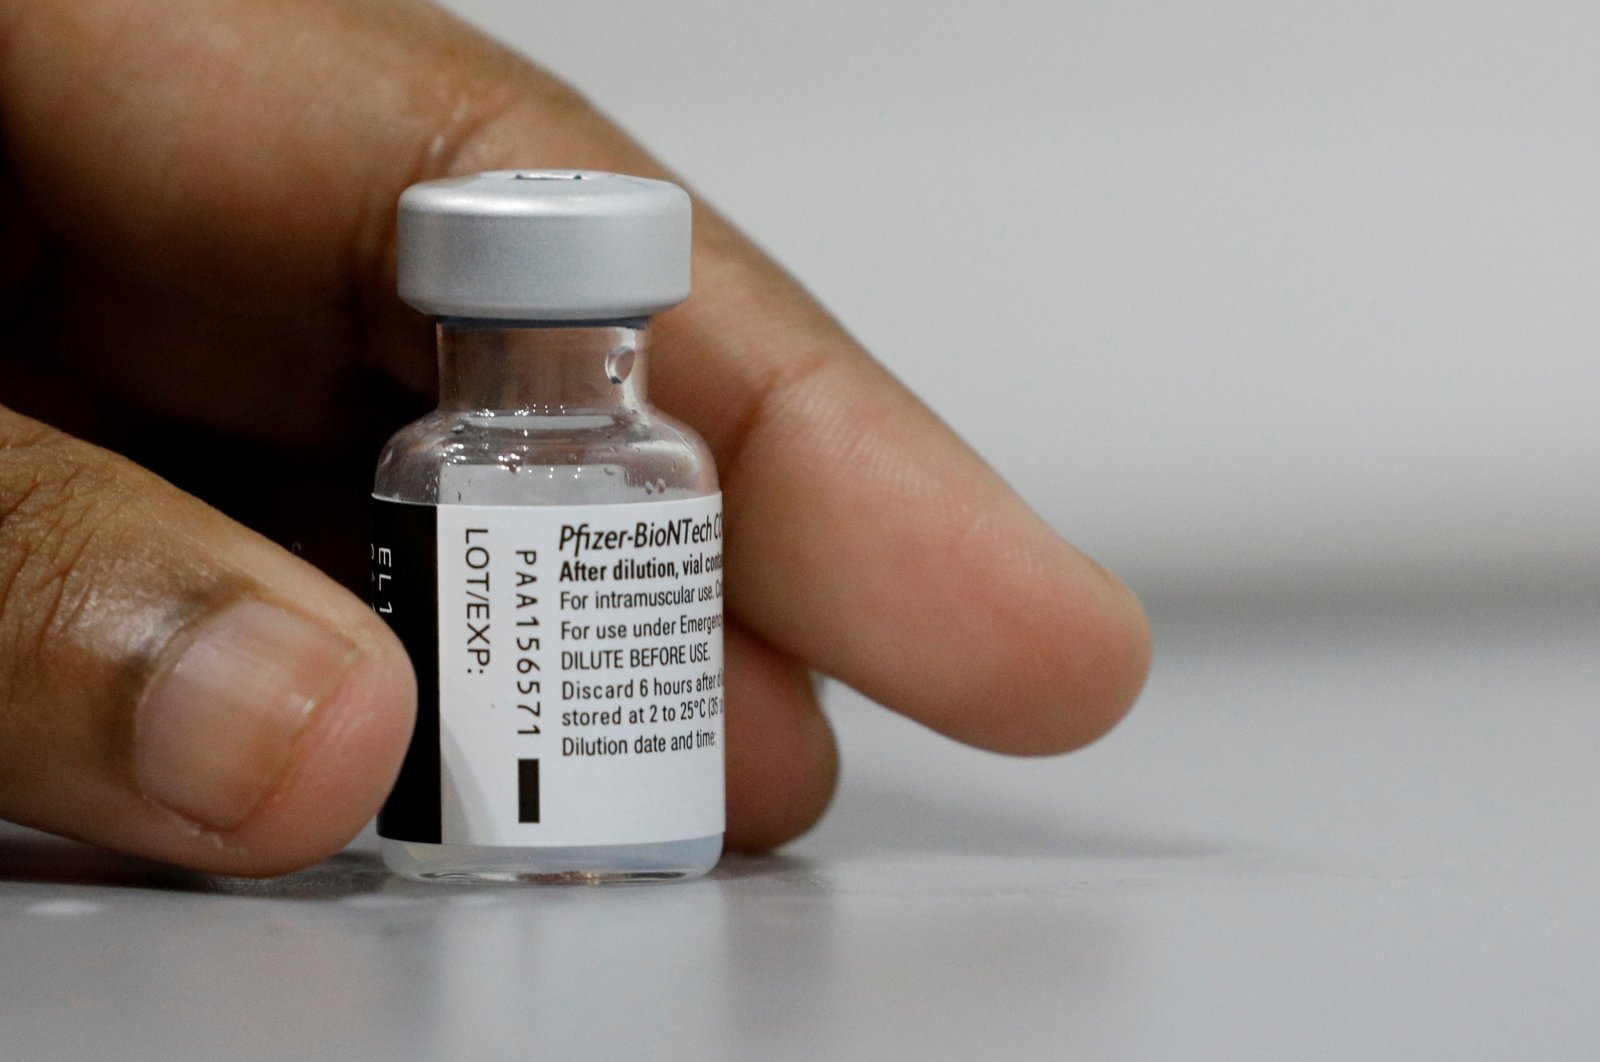 A medical worker prepares to dilute a vial of Pfizer-BioNTech's COVID-19 vaccine at a vaccination center in Singapore, March 8, 2021. (Reuters Photo)